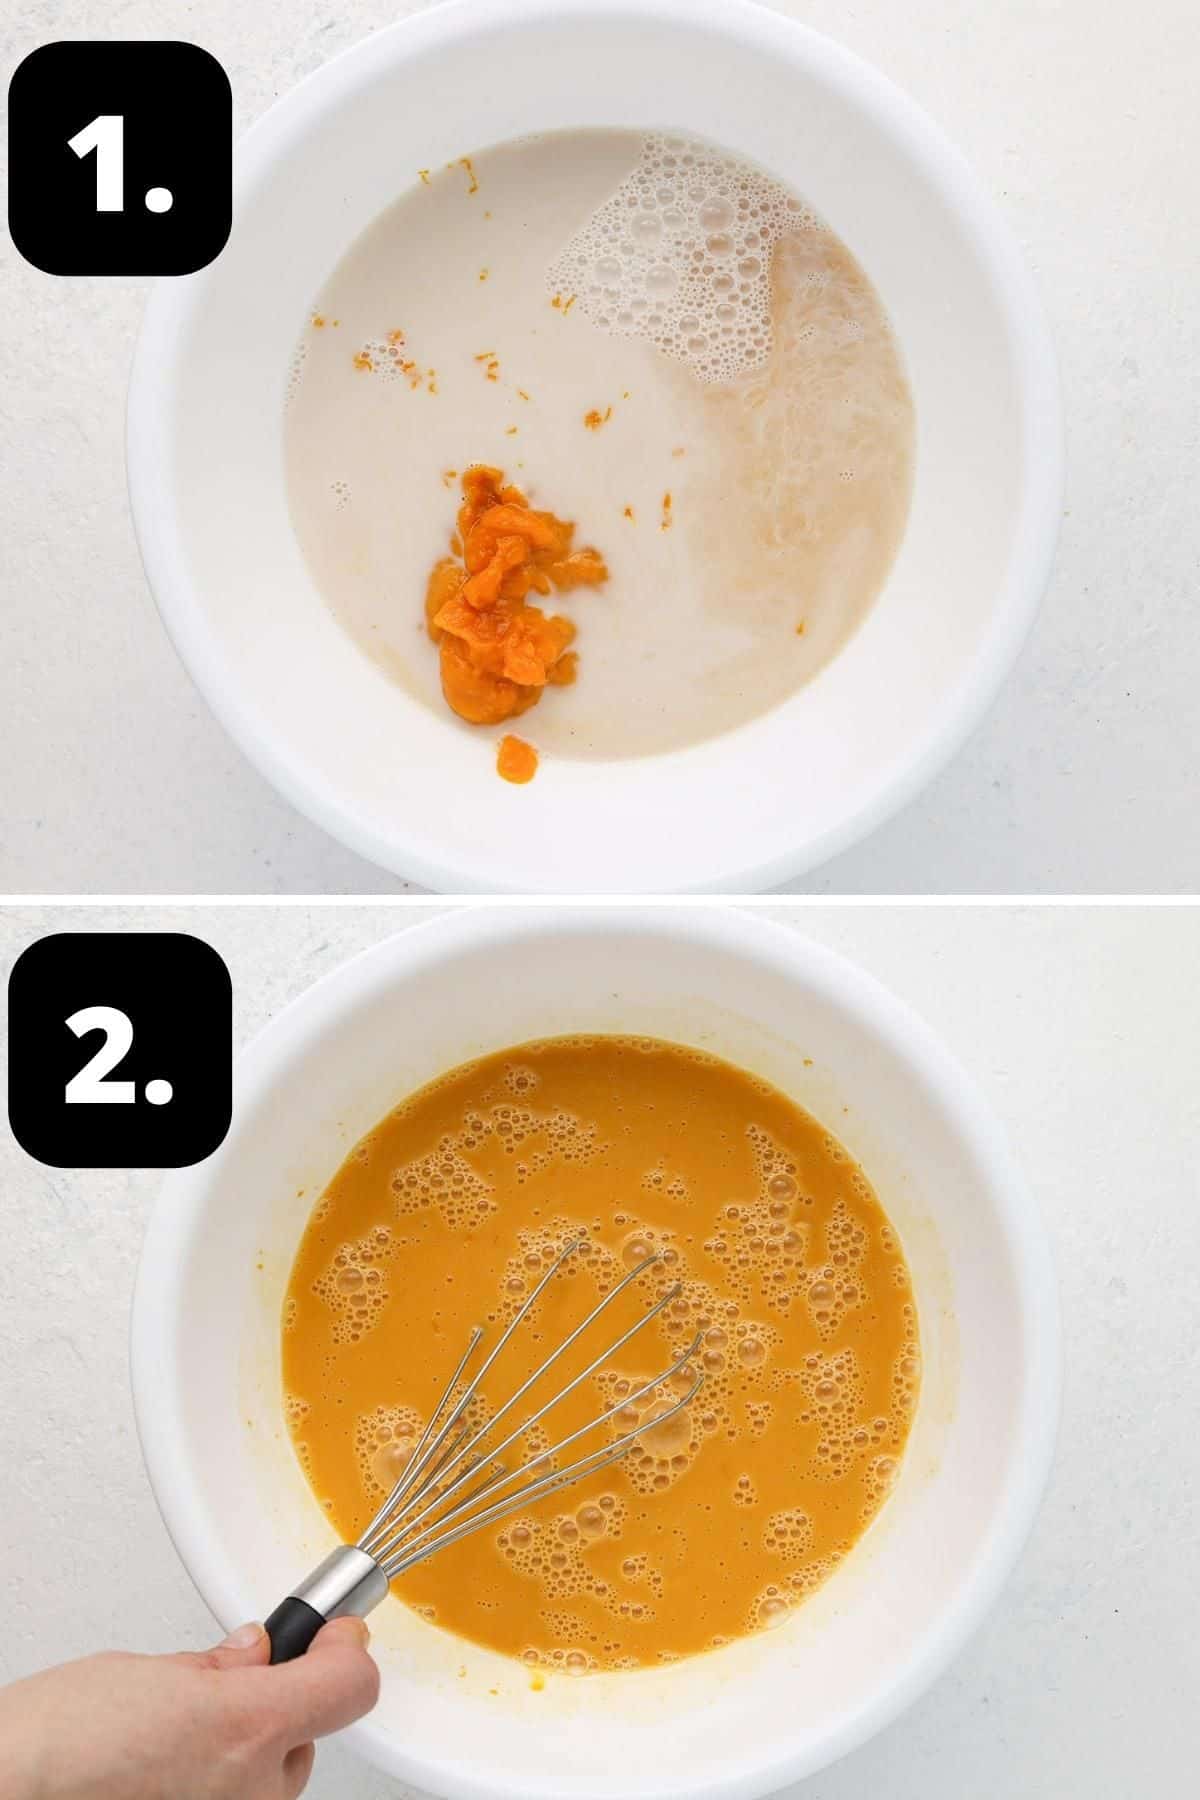 Steps 1-2 of preparing this recipe - the liquid ingredients in a bowl and whisking the ingredients together.